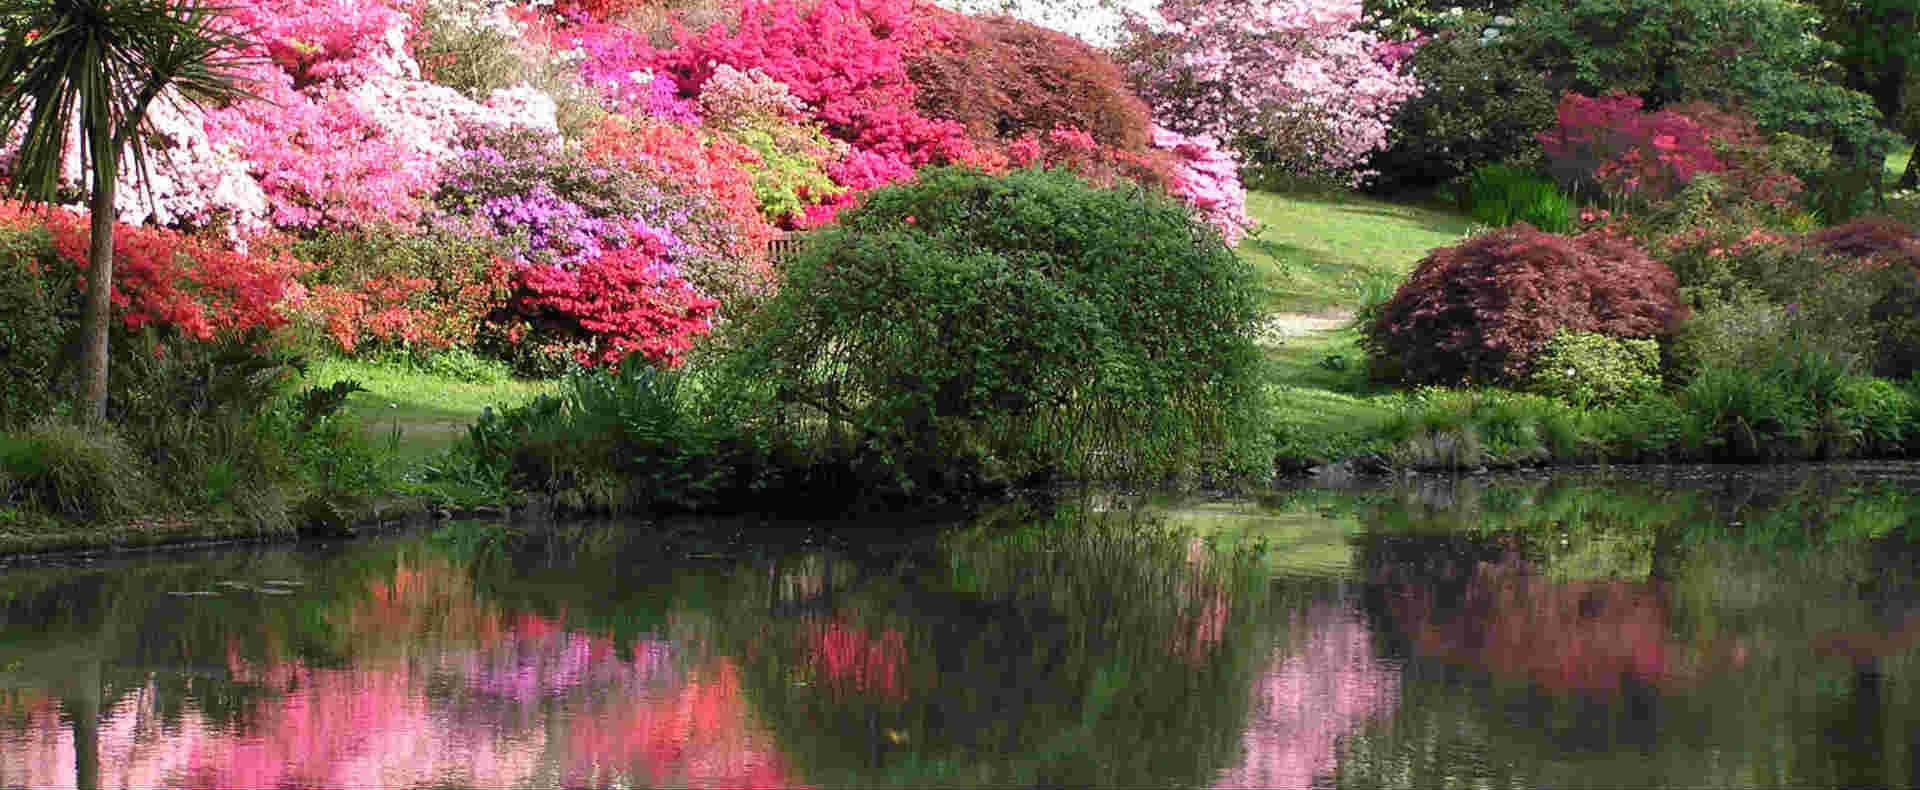 our The Famous Exbury Gardens in Beaulieu Hampshire1